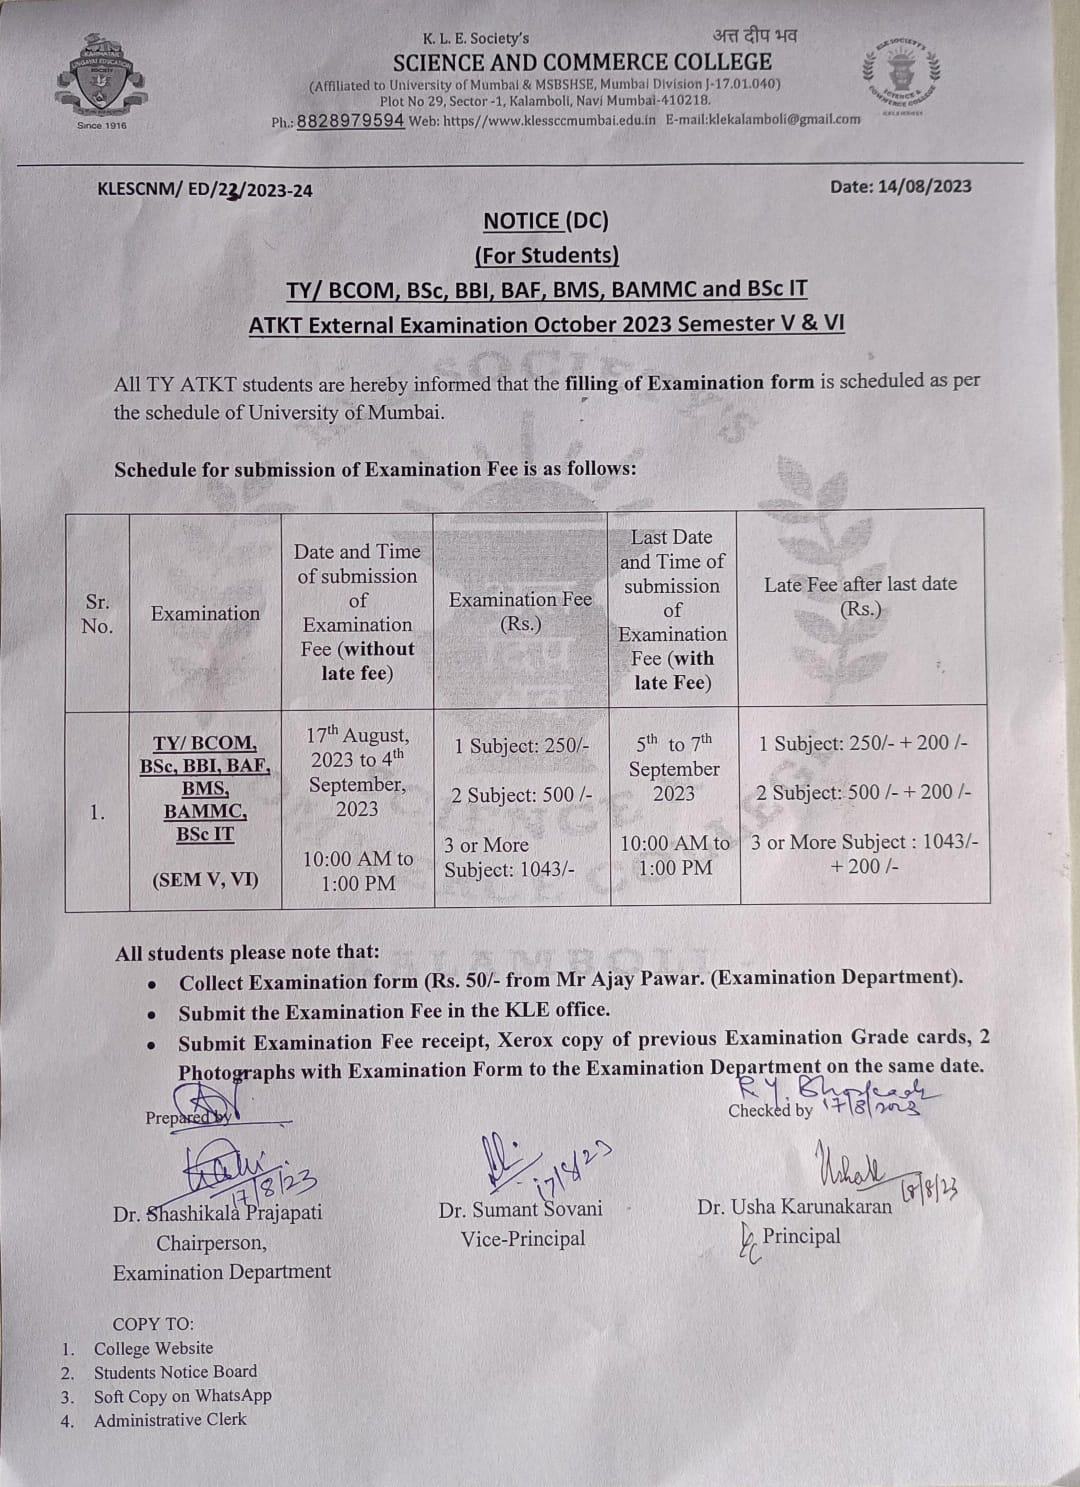 Schedule for Submission of Examination Fee